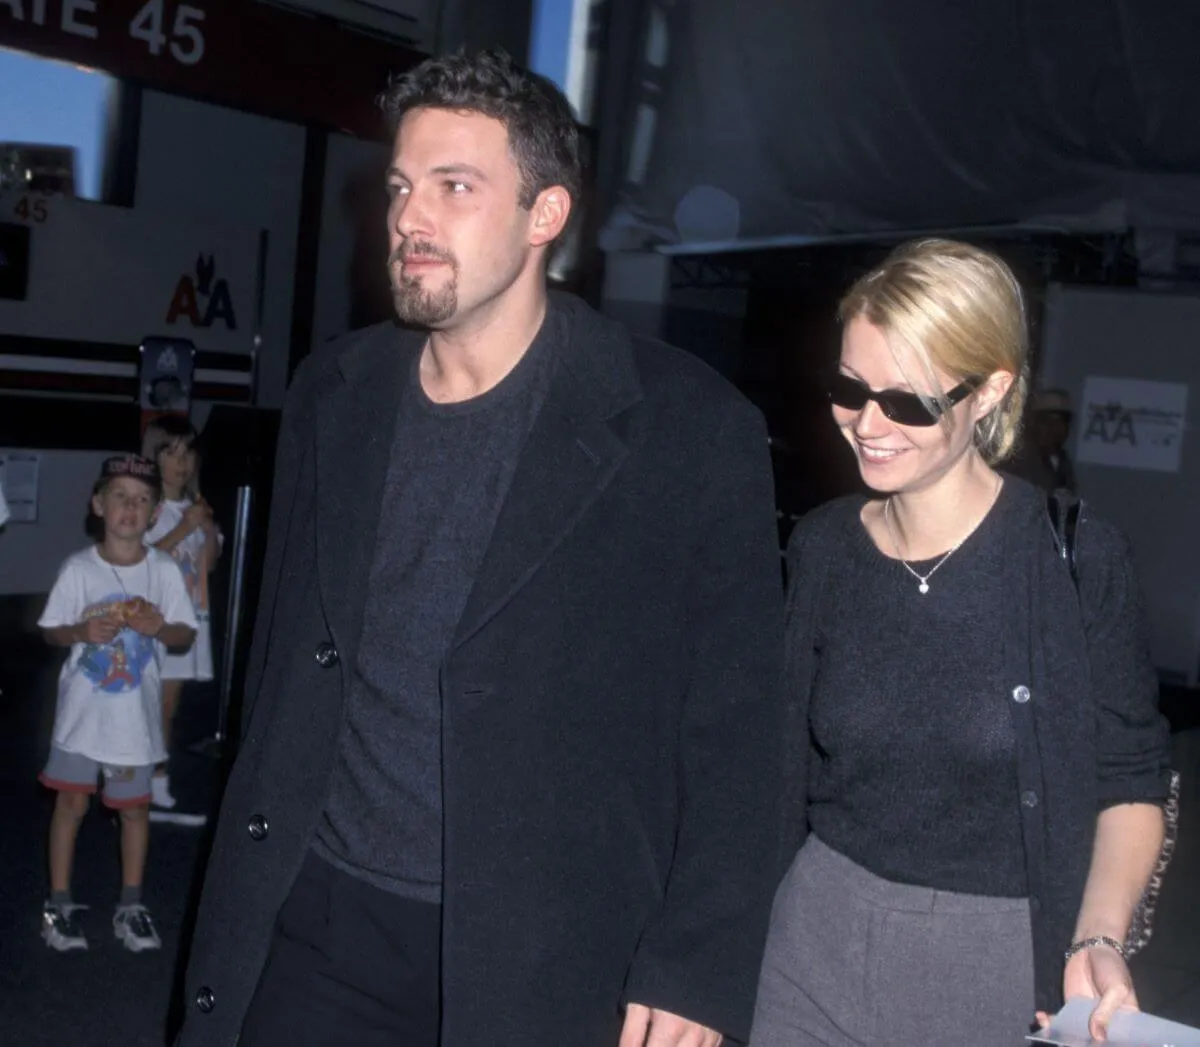 Ben Affleck and Gwyneth Paltrow hold hands and walk together. They both wear black and she wears sunglasses.